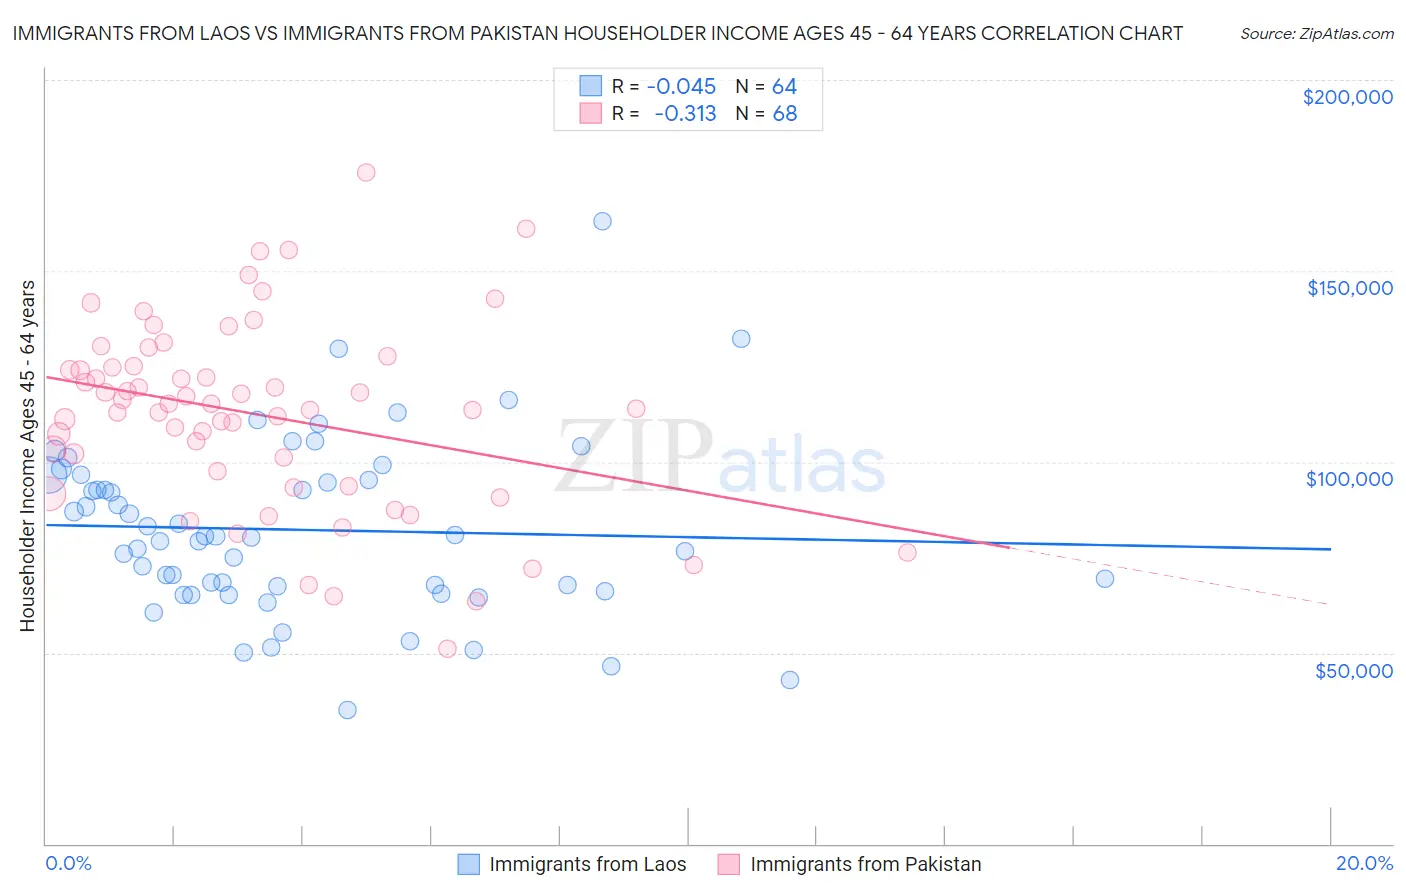 Immigrants from Laos vs Immigrants from Pakistan Householder Income Ages 45 - 64 years